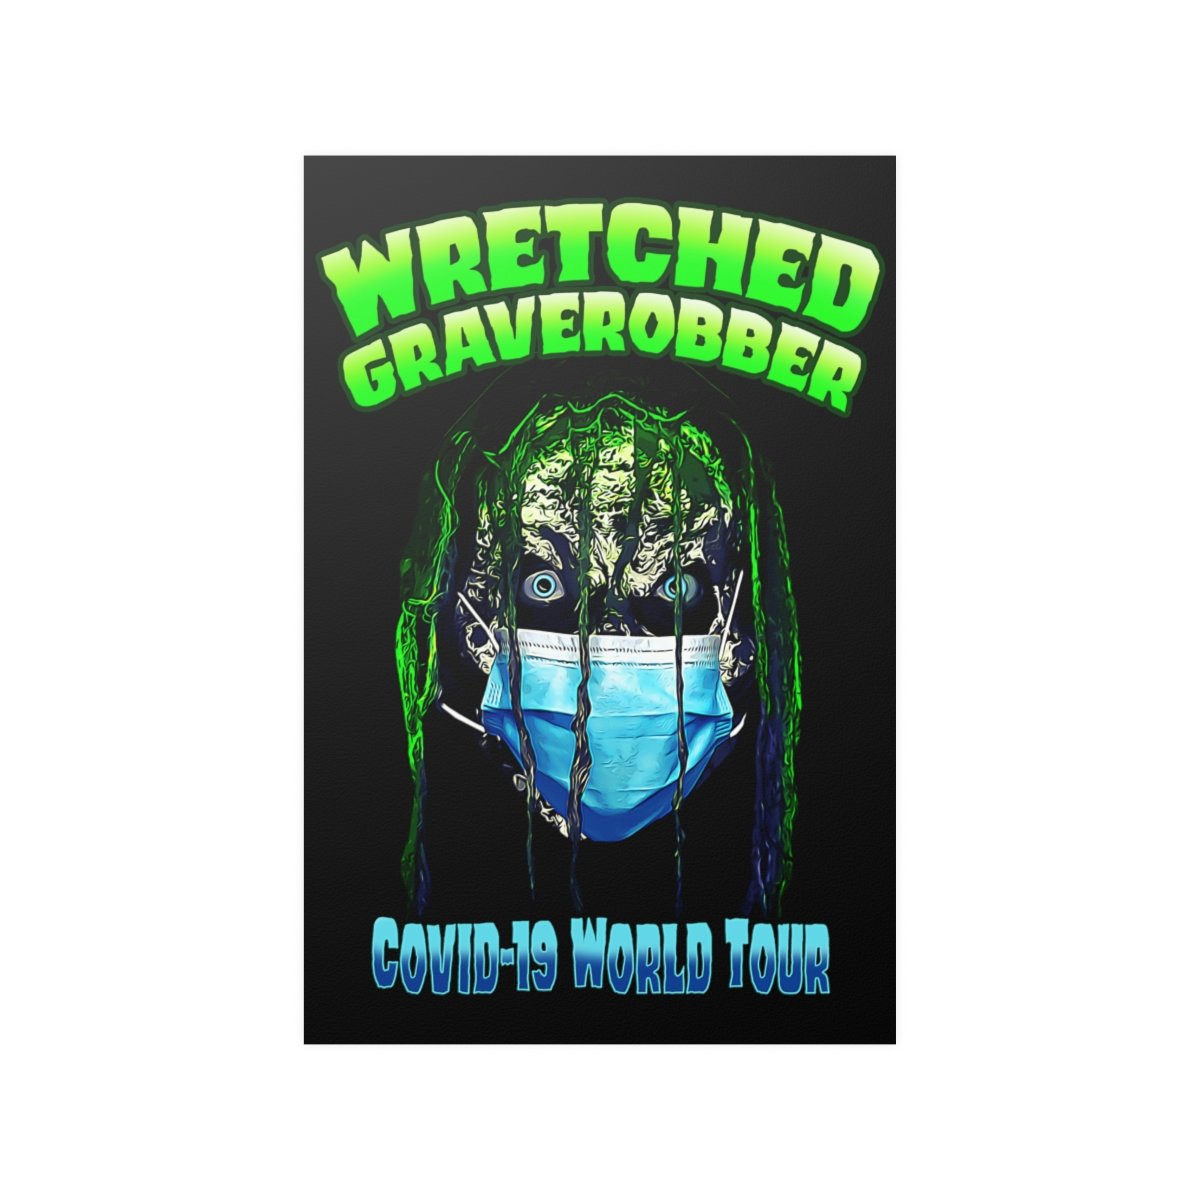 Wretched Graverobber Covid 19 World Tour Posters